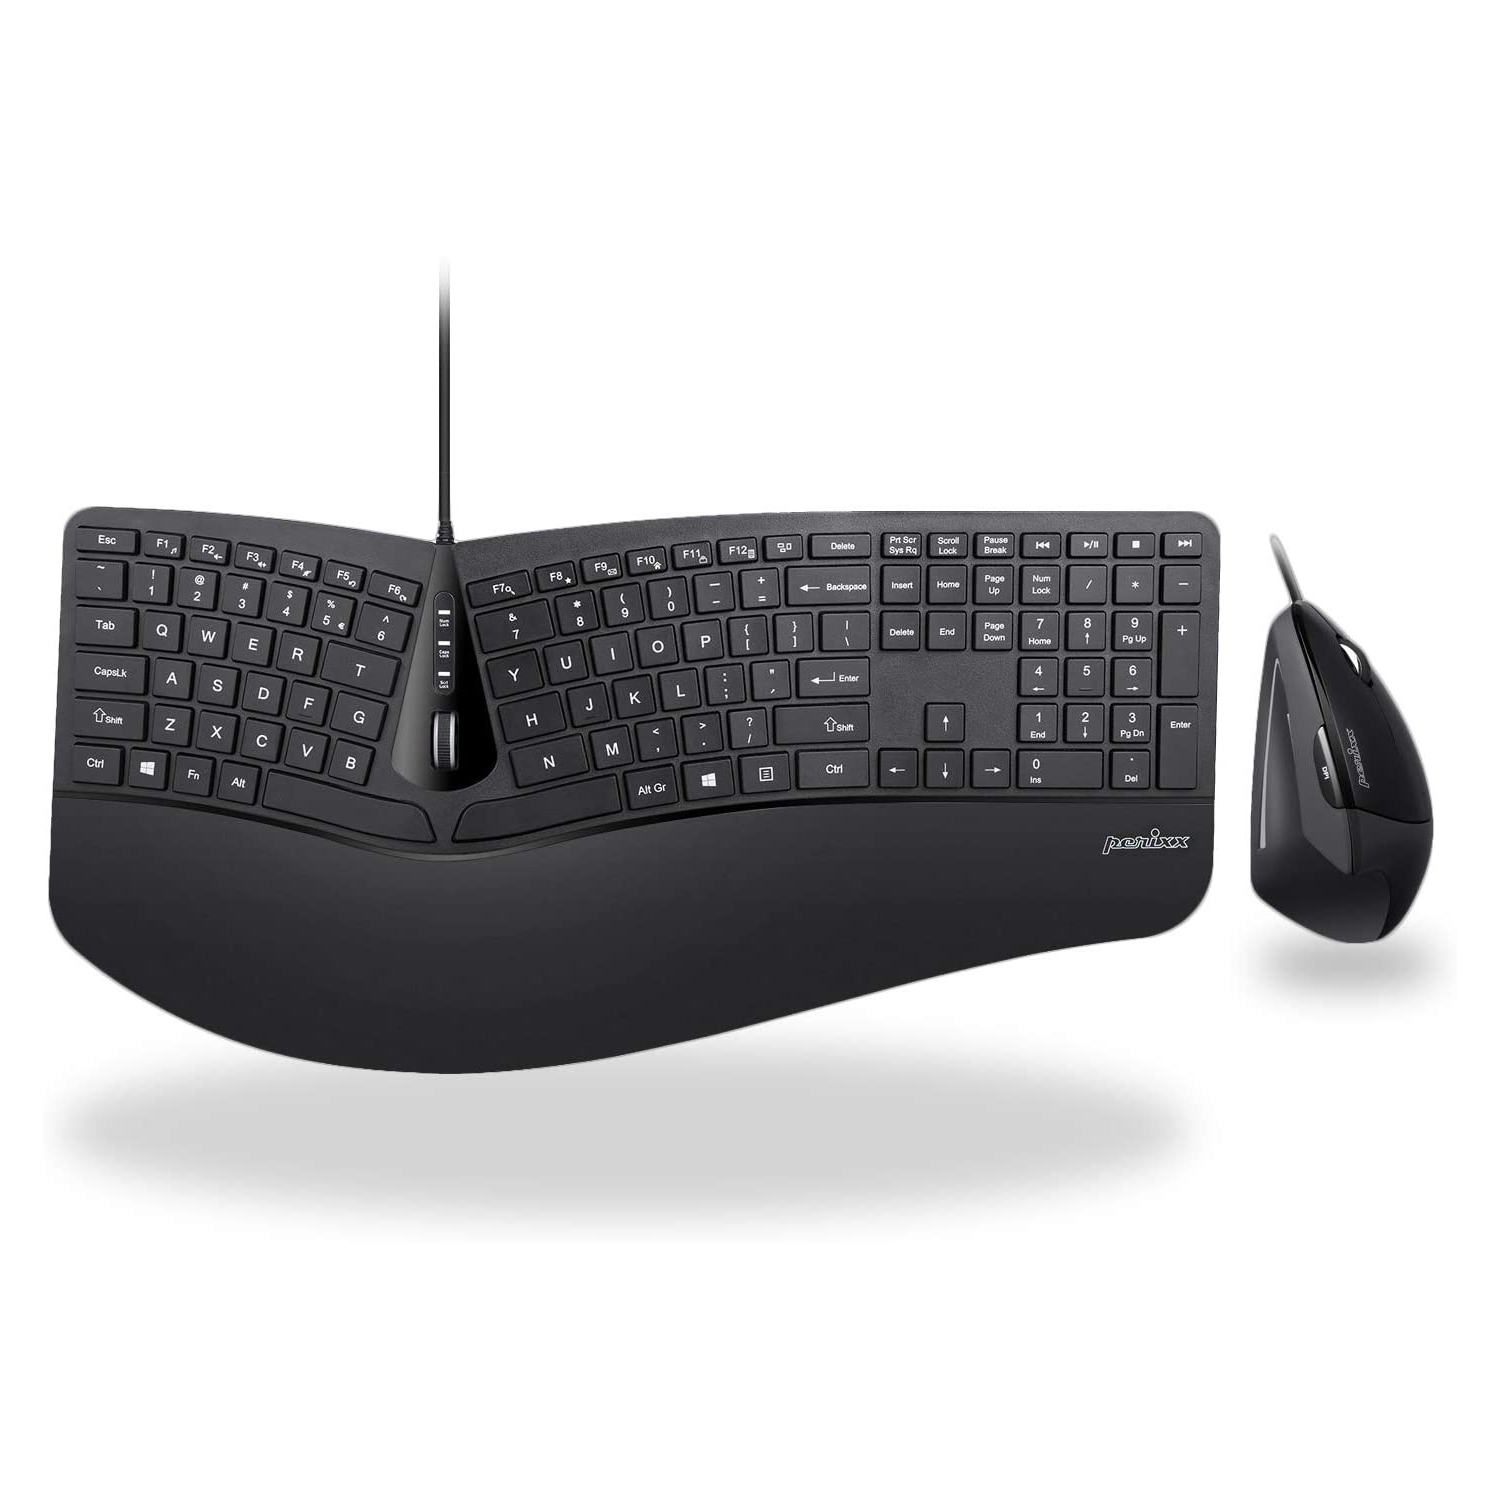 Periduo-505, Wired USB Ergonomic Split Keyboard and Vertical Mouse Combo with Adjustable Palm Rest and Short